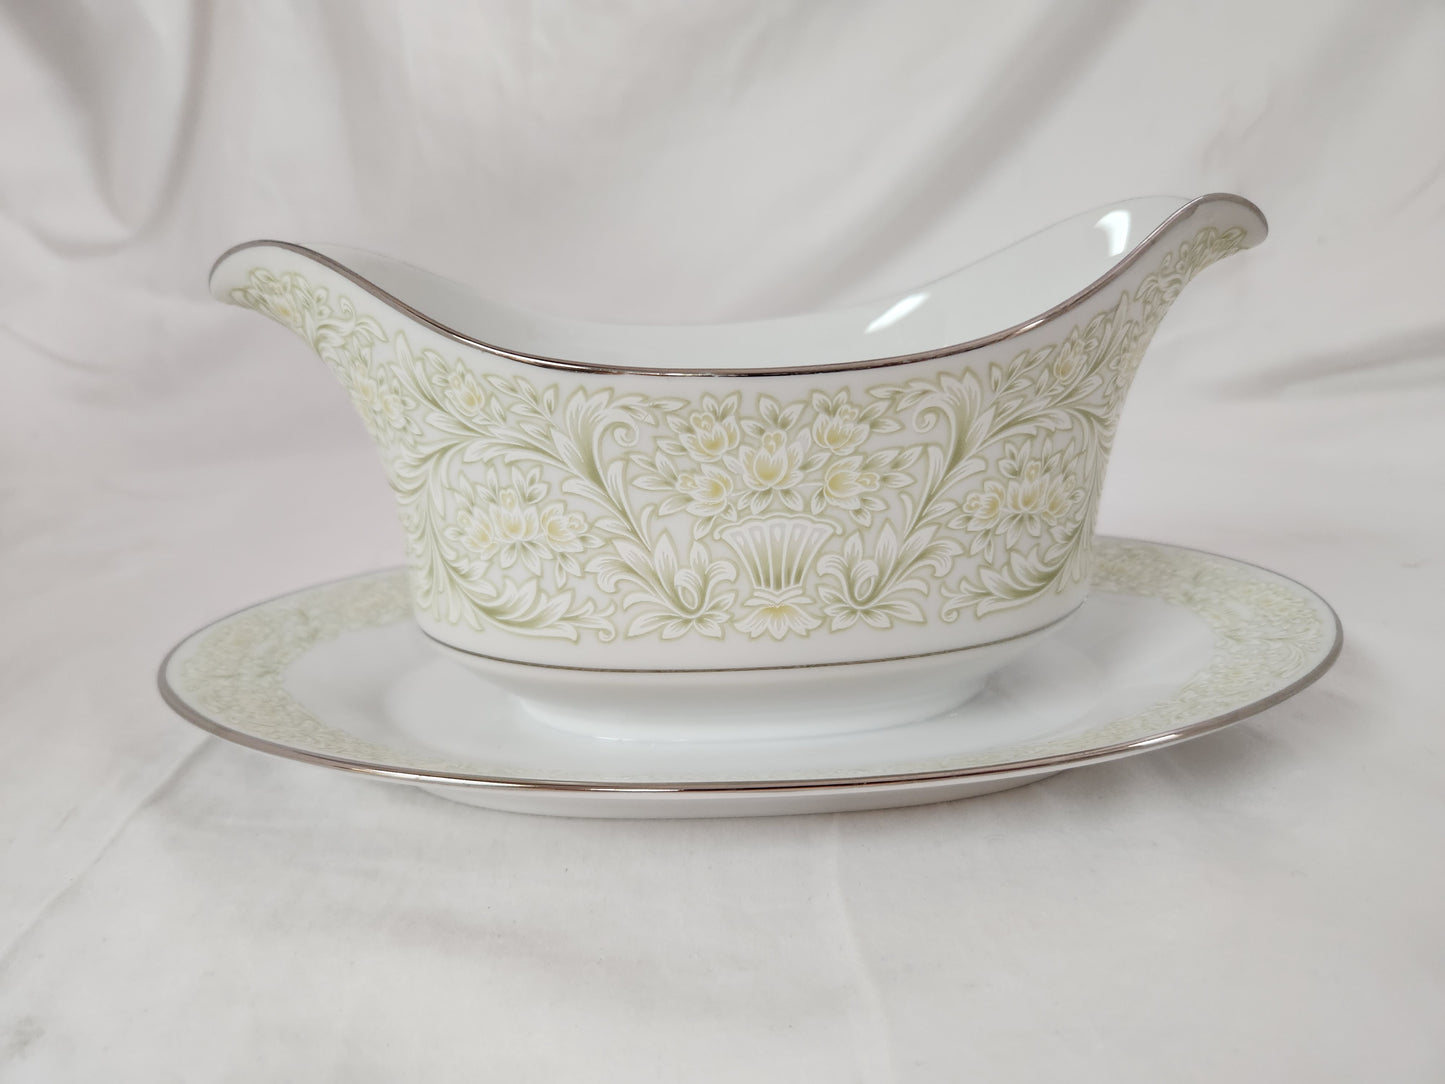 Sango China PHOENICIA Gravy Boat with Attached Underplate #3765